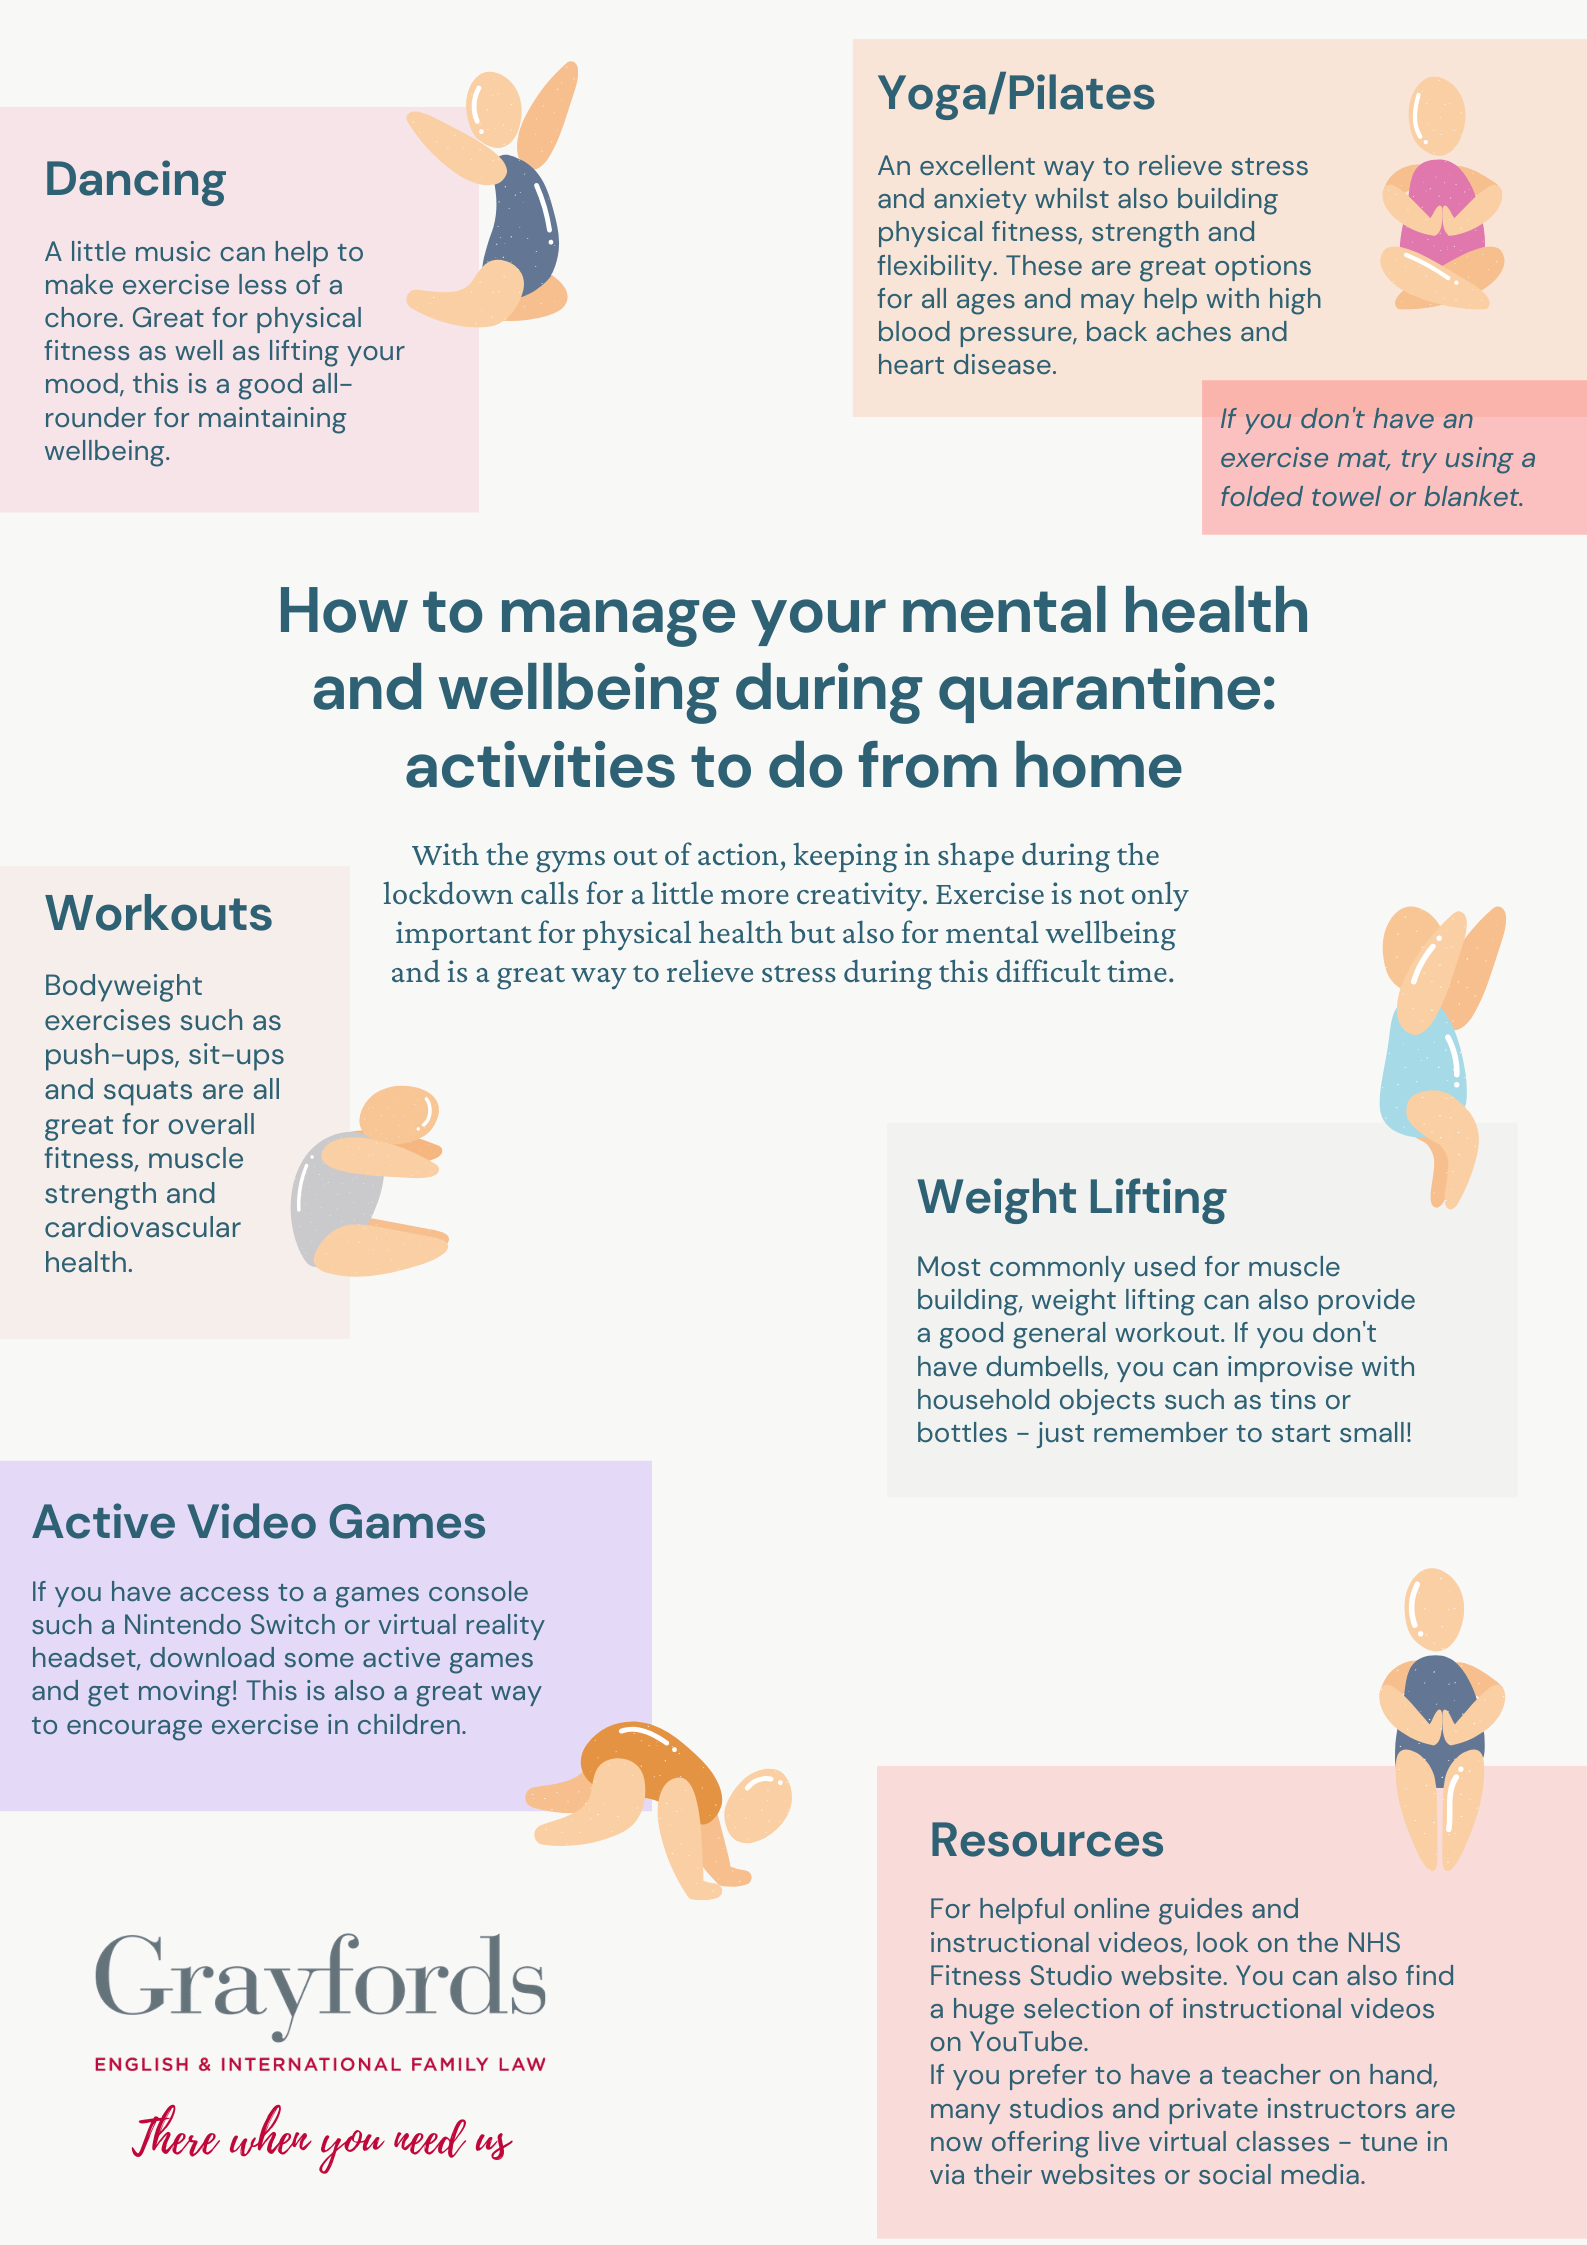 How To Manage Your Mental Health And Wellbeing During Quarantine: Activities To Do From Home